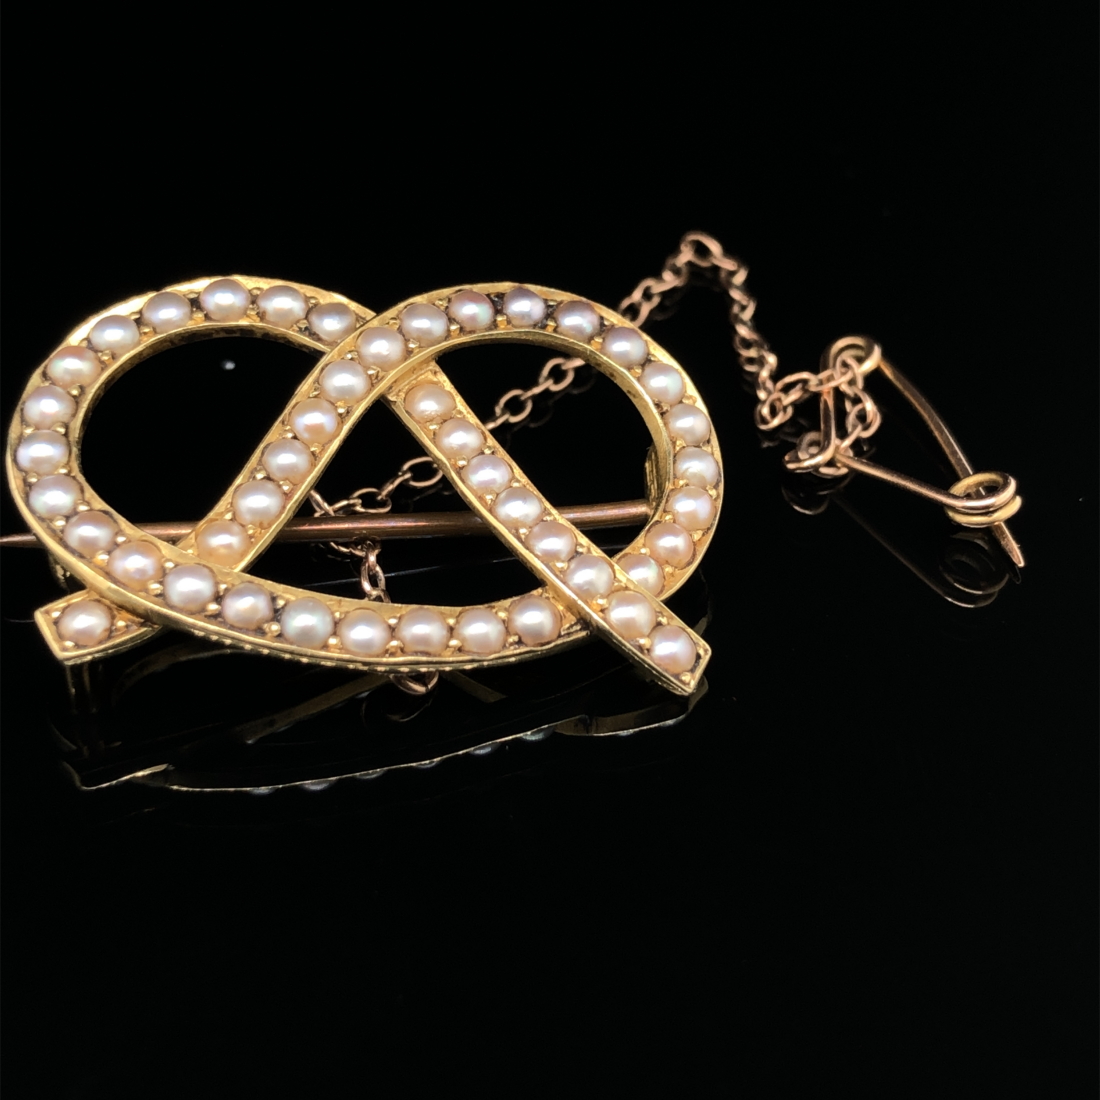 AN ANTIQUE GOLD AND SEED PEARL SWEETHEART LOVERS KNOT, ALSO KNOWN AS A STAFFORD KNOT BROOCH. THE - Image 2 of 3